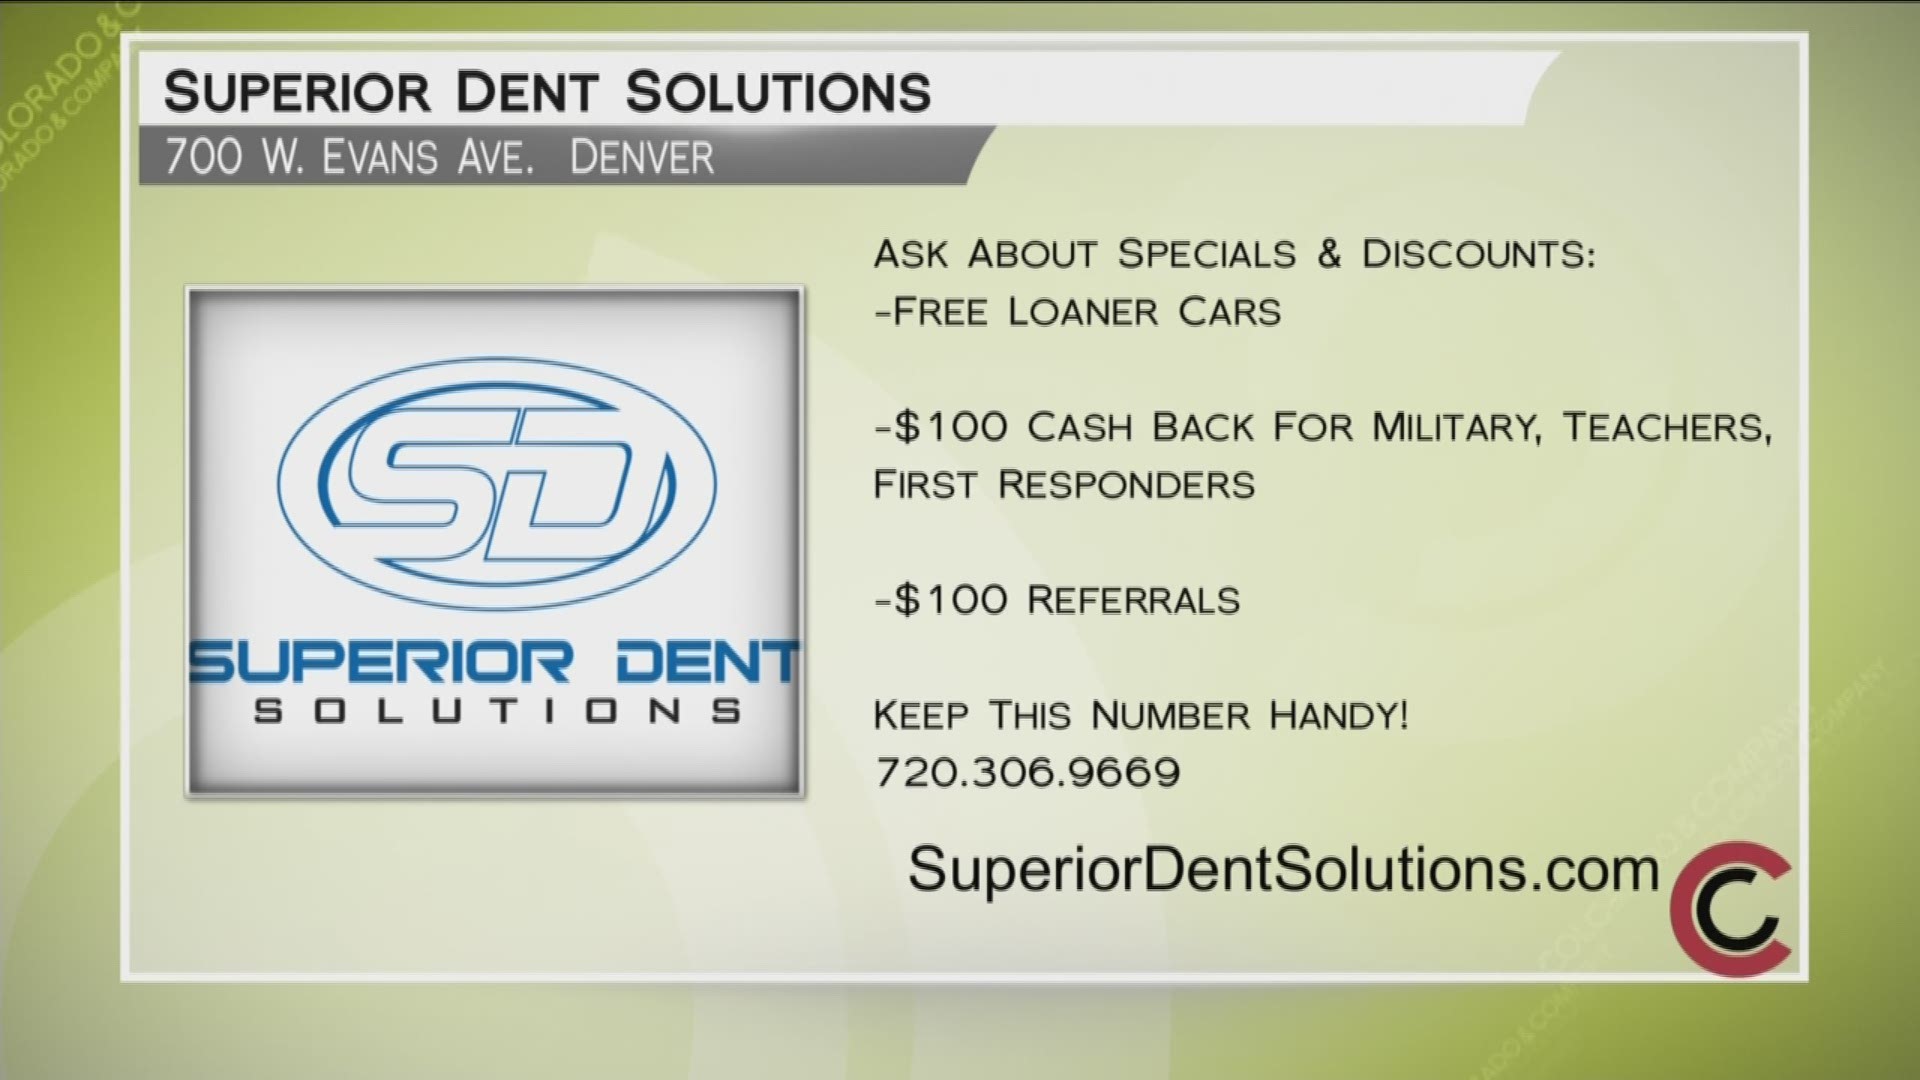 Give Superior Dent Solutions a call today—720.306.9669. They’re easy to find at 700 West Evans Ave. Ask about today’s specials and discount offers for military, teachers and first responders. Learn more about getting your hail damaged car looking new again at www.SuperiorDentSolutions.com. 
THIS INTERVIEW HAS COMMERCIAL CONTENT. PRODUCTS AND SERVICES FEATURED APPEAR AS PAID ADVERTISING.